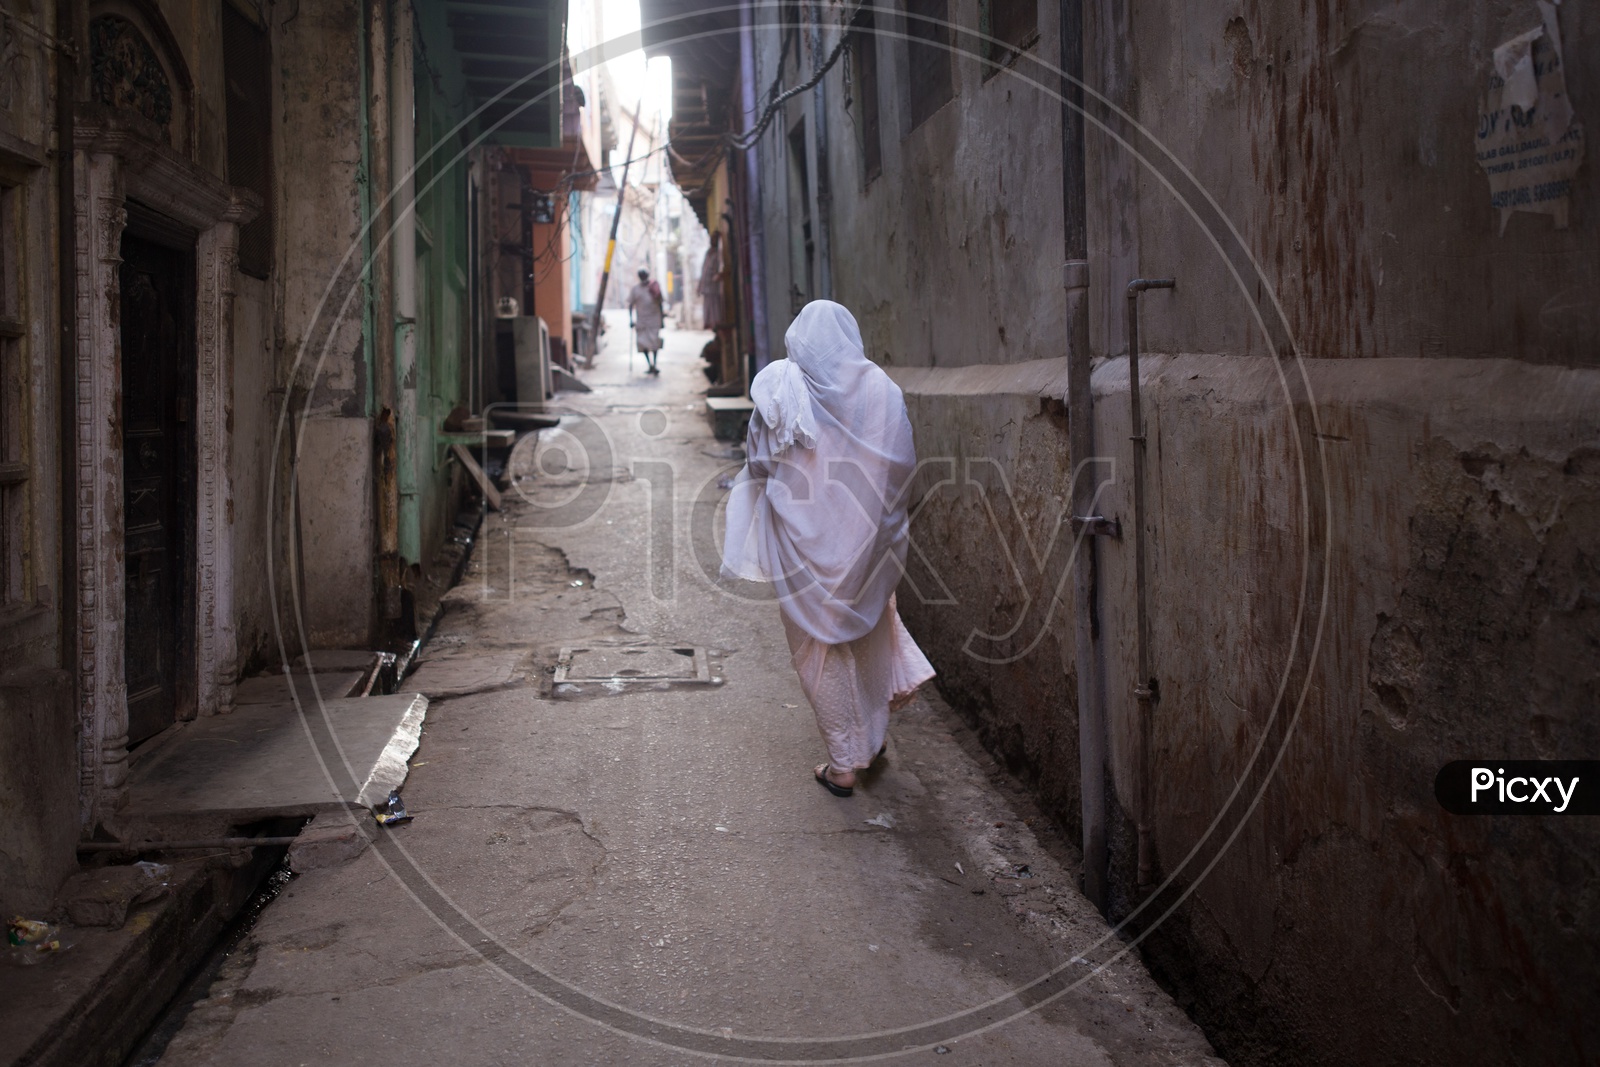 An Old Widow Woman in White clothes Walking on The Streets Of Barsana